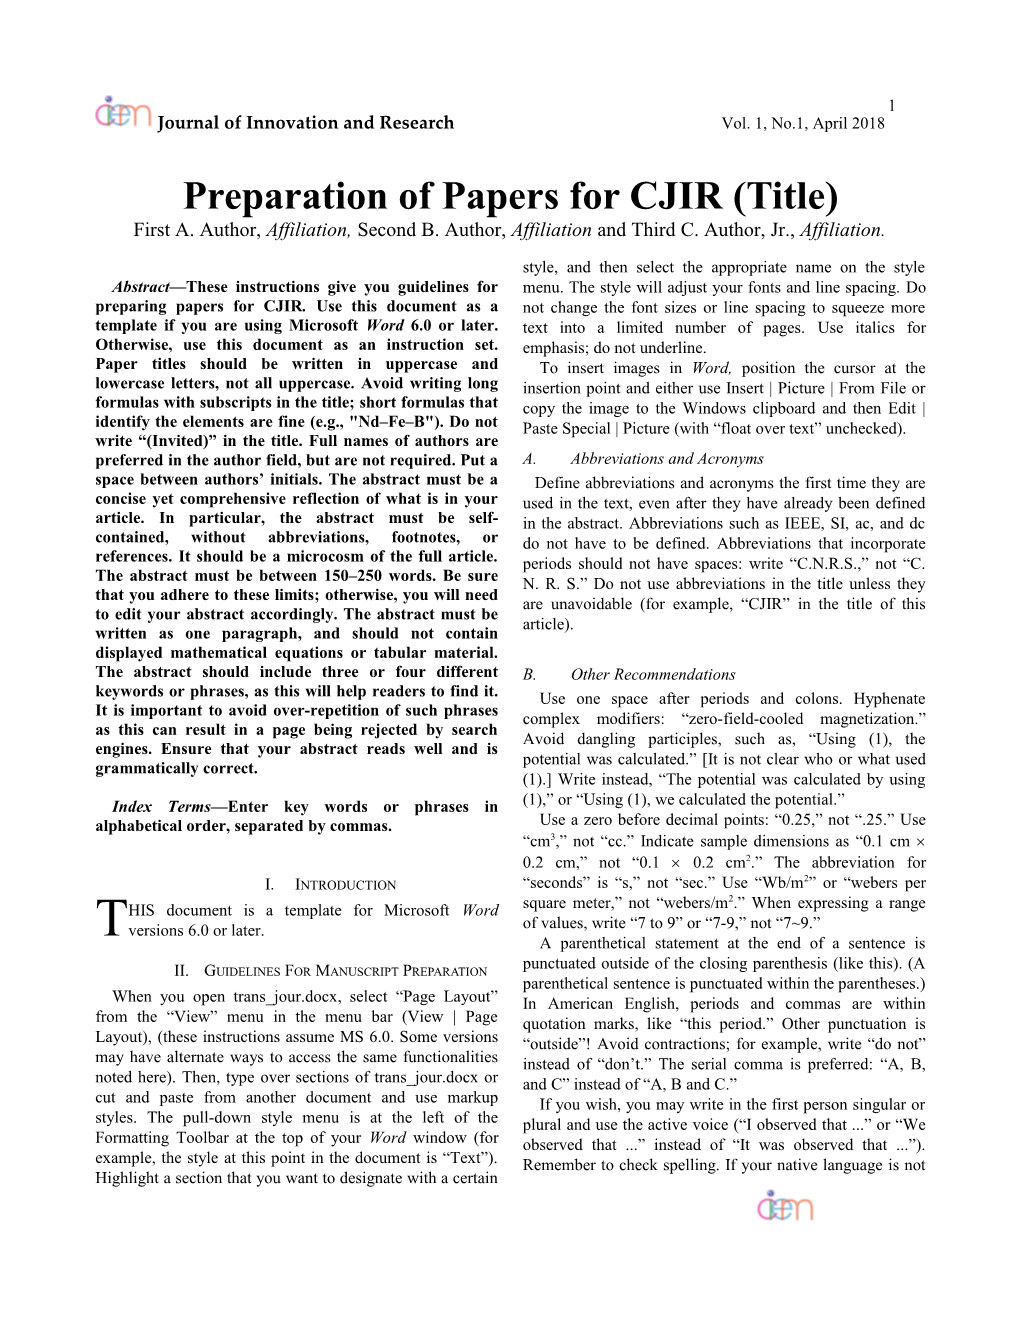 Preparation of Papers for CJIR(Title)